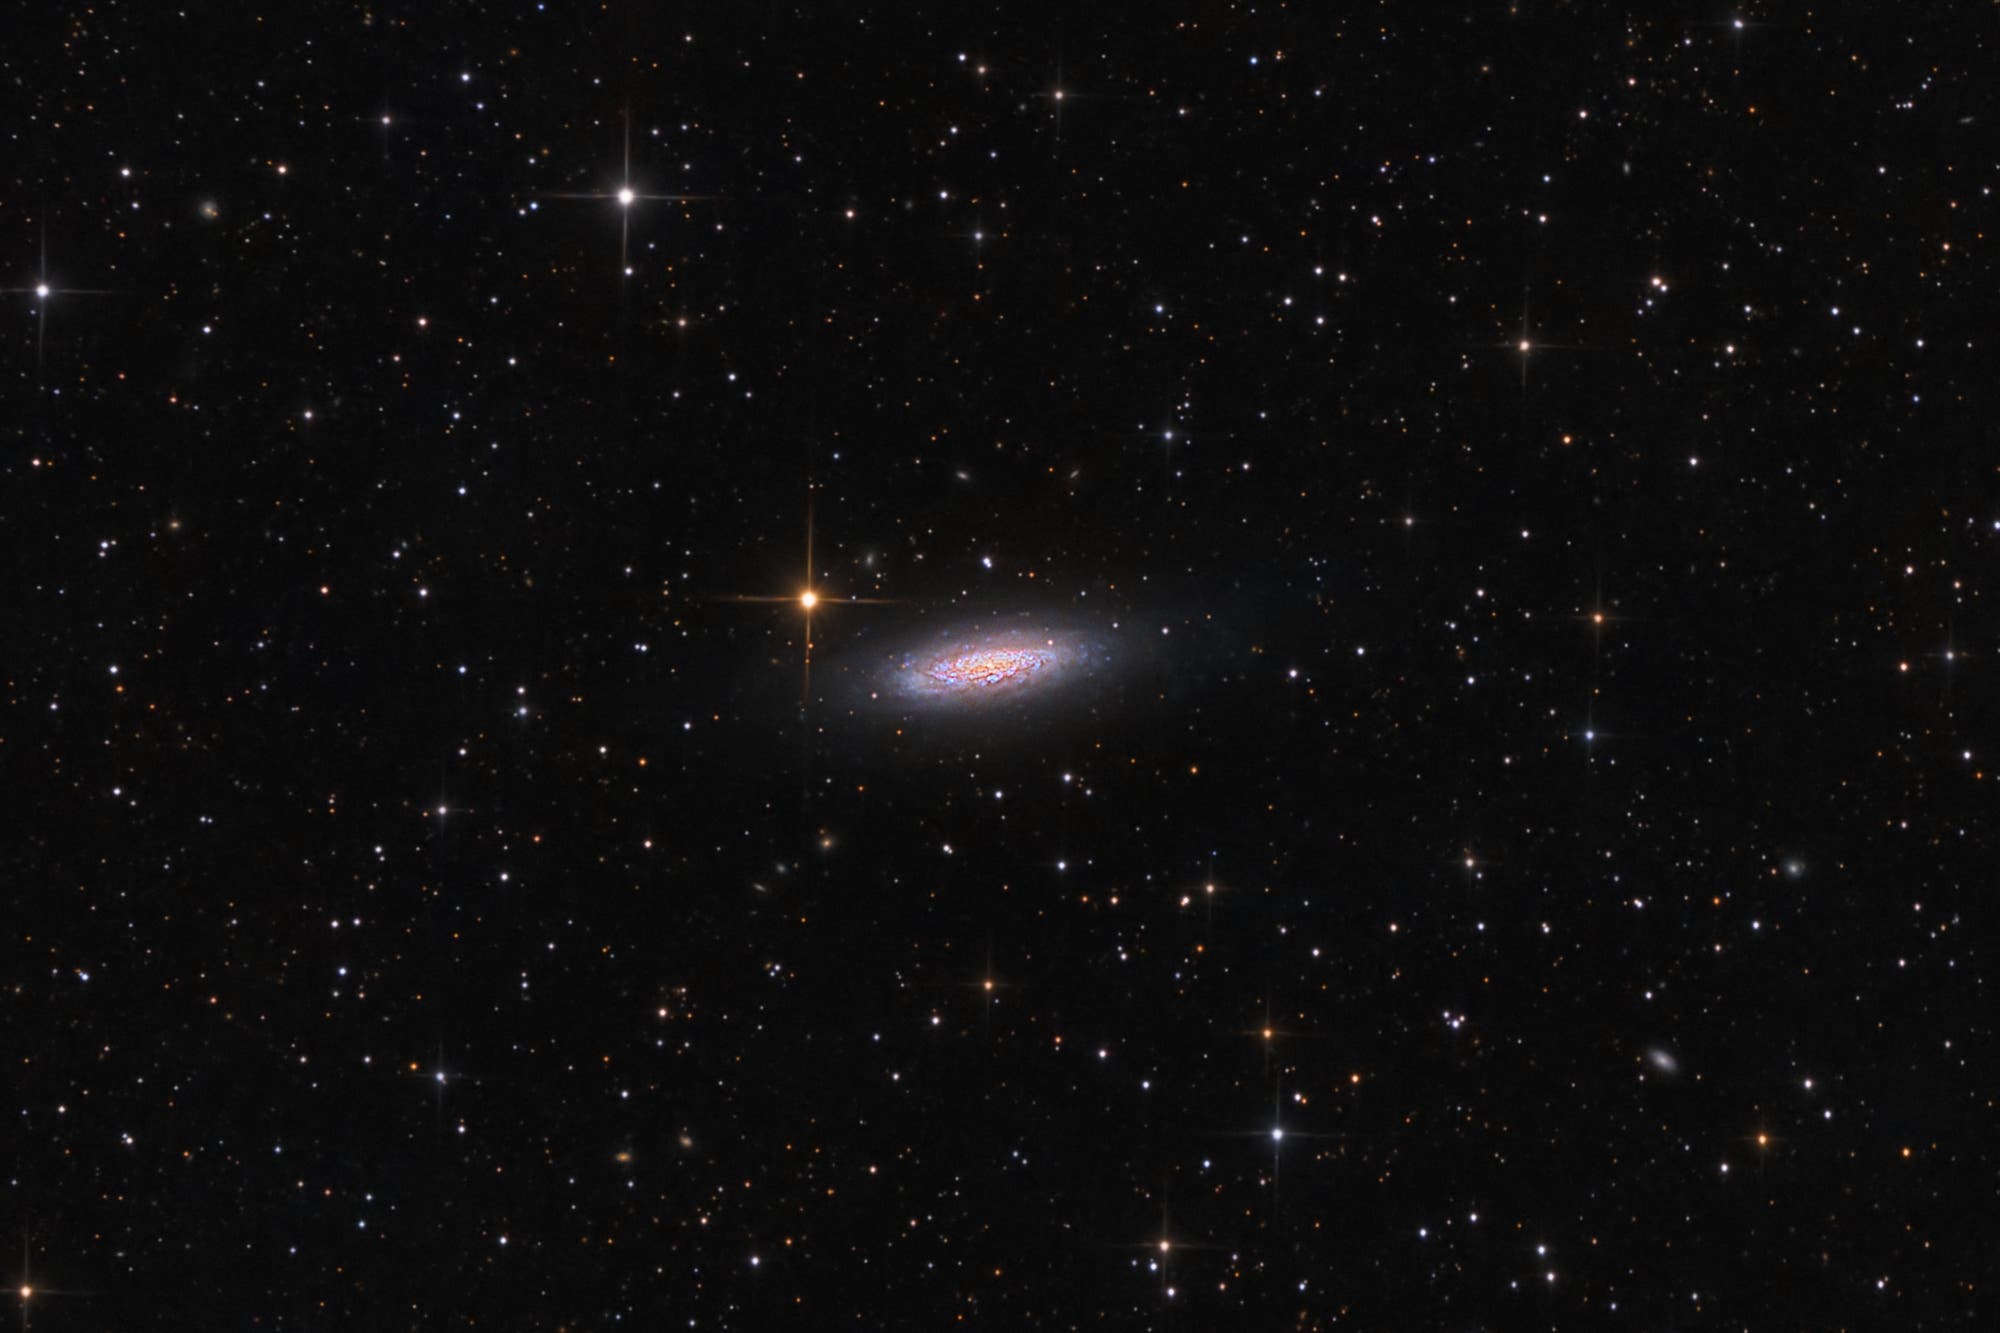 Lost in Space Galaxy - NGC 6503